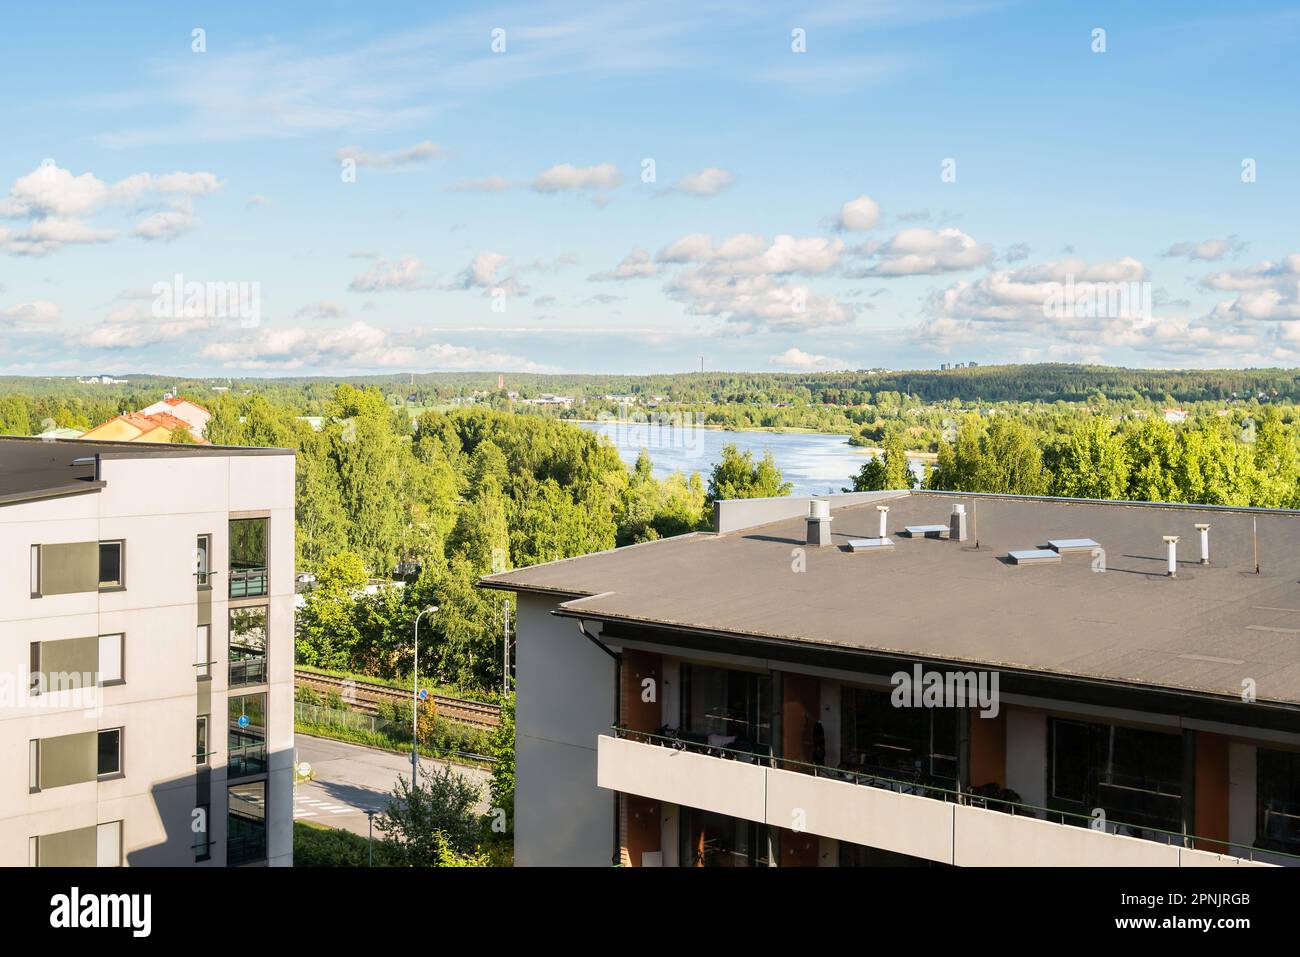 Building with apartments, condos in residential area. Park, green forest and lake landscape view. Outside facade of house. Rental housing. Stock Photo